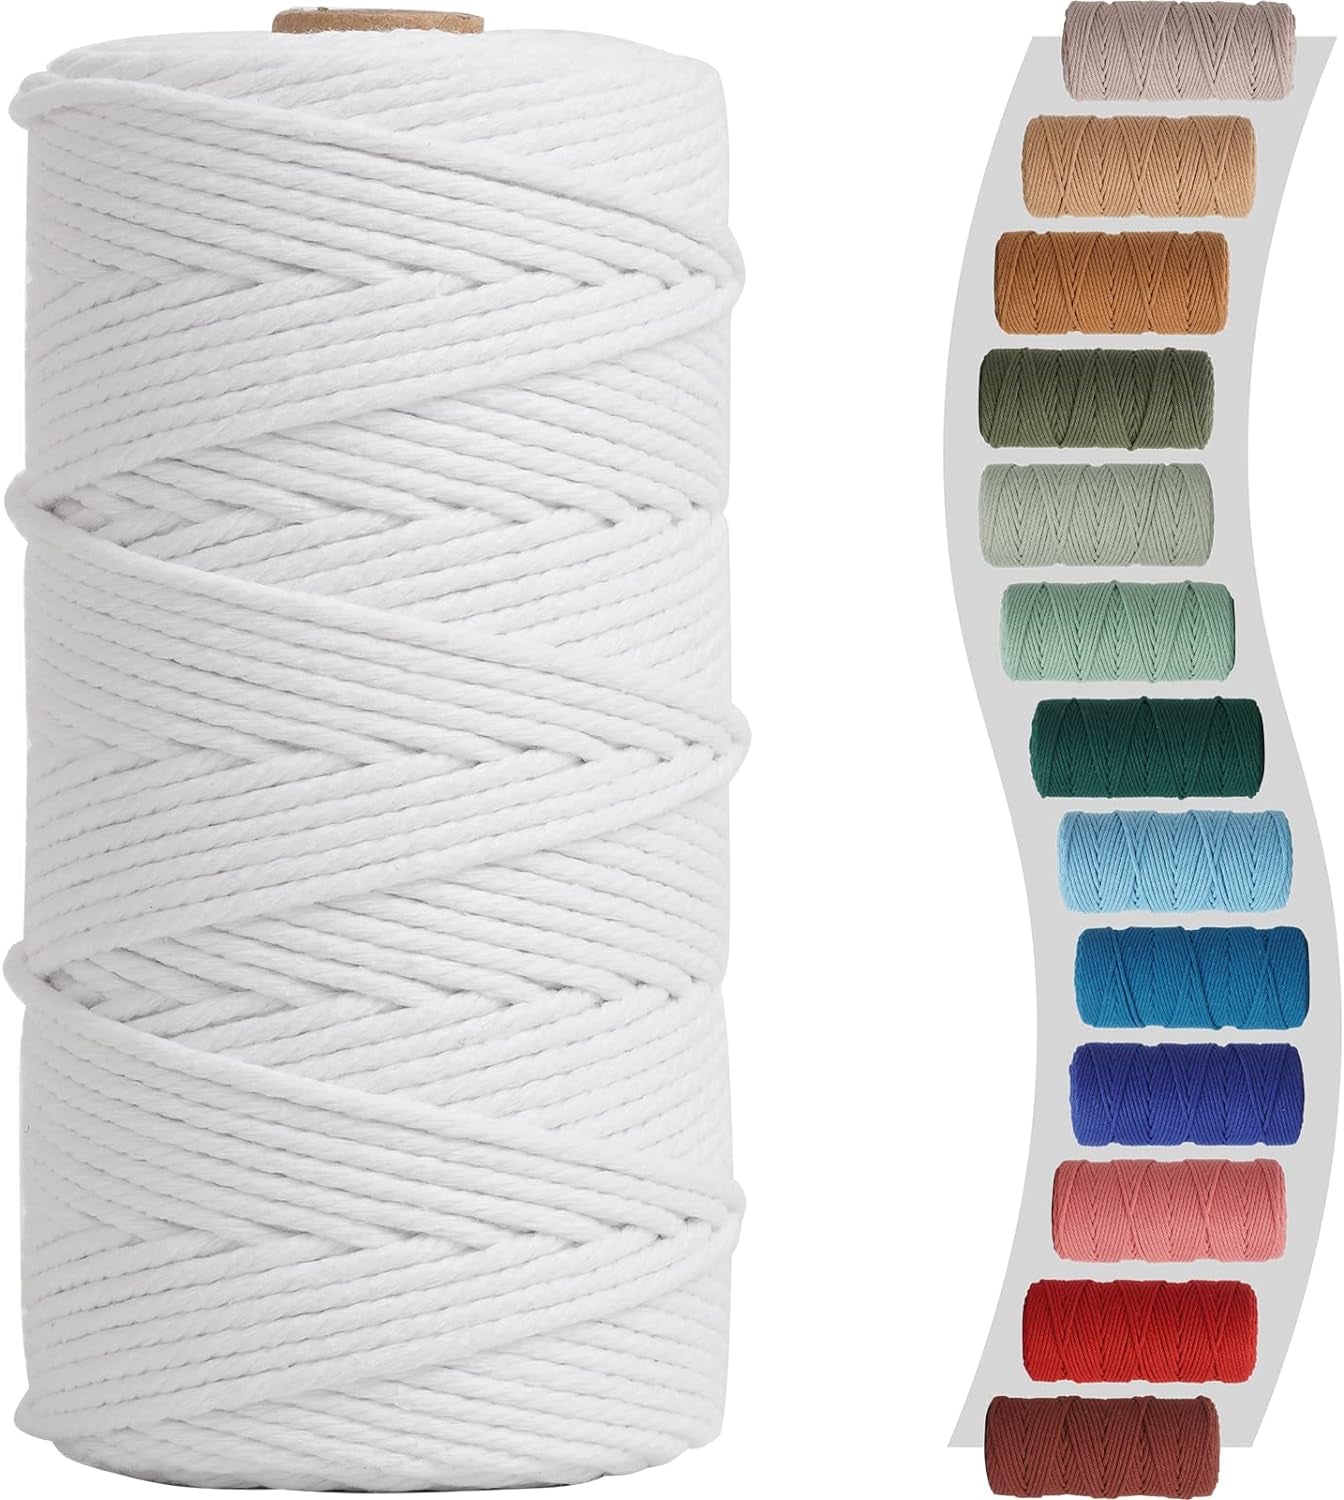 Macrame Cord 3Mm 220Yards (200 Meters) Mint Green Macrame Supplies Macrame Yarn, Colored Cotton Rope, Colored Cord for DIY